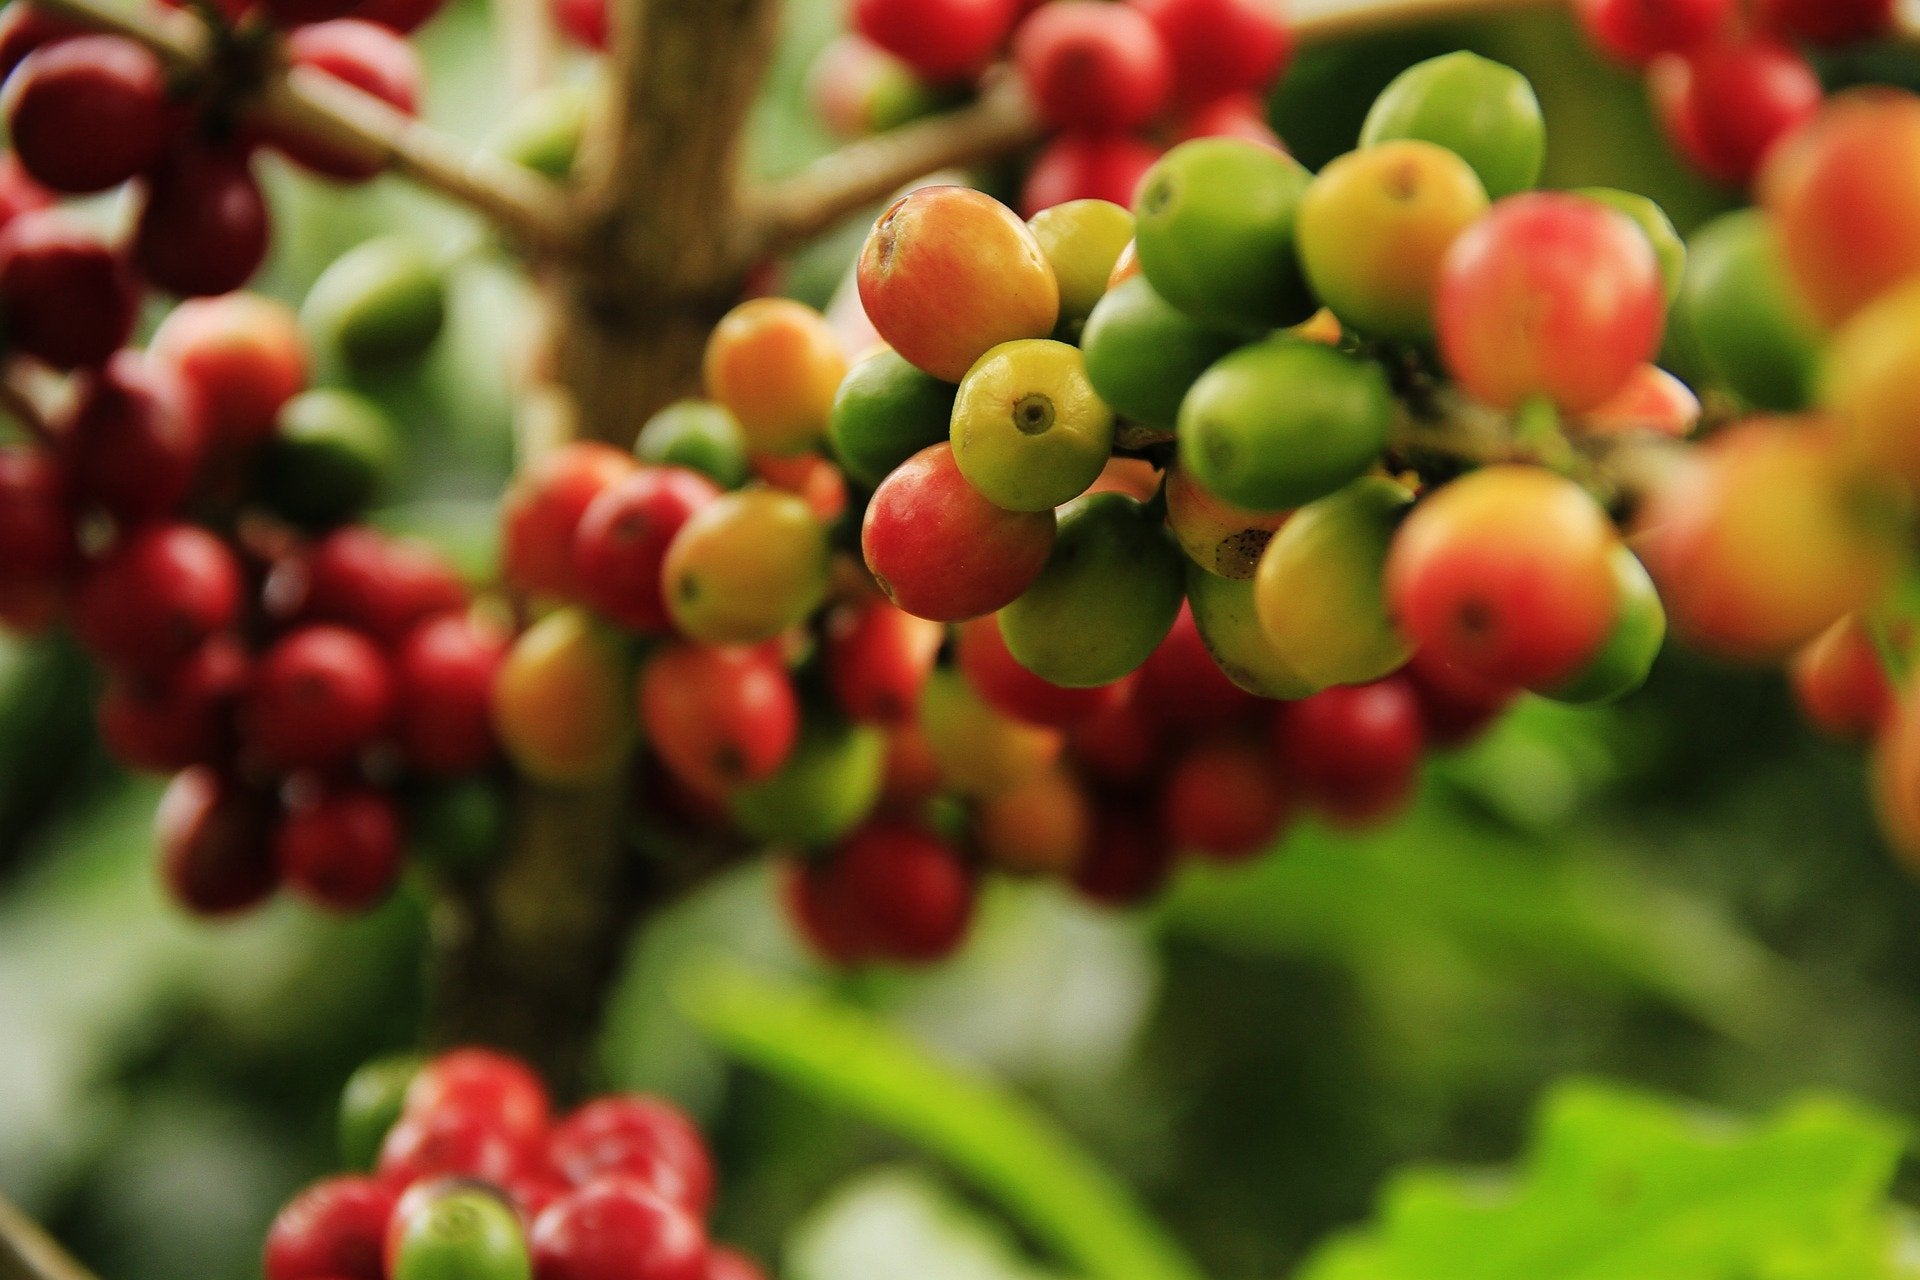 How Is Coffee Grown, Harvested And Processed?